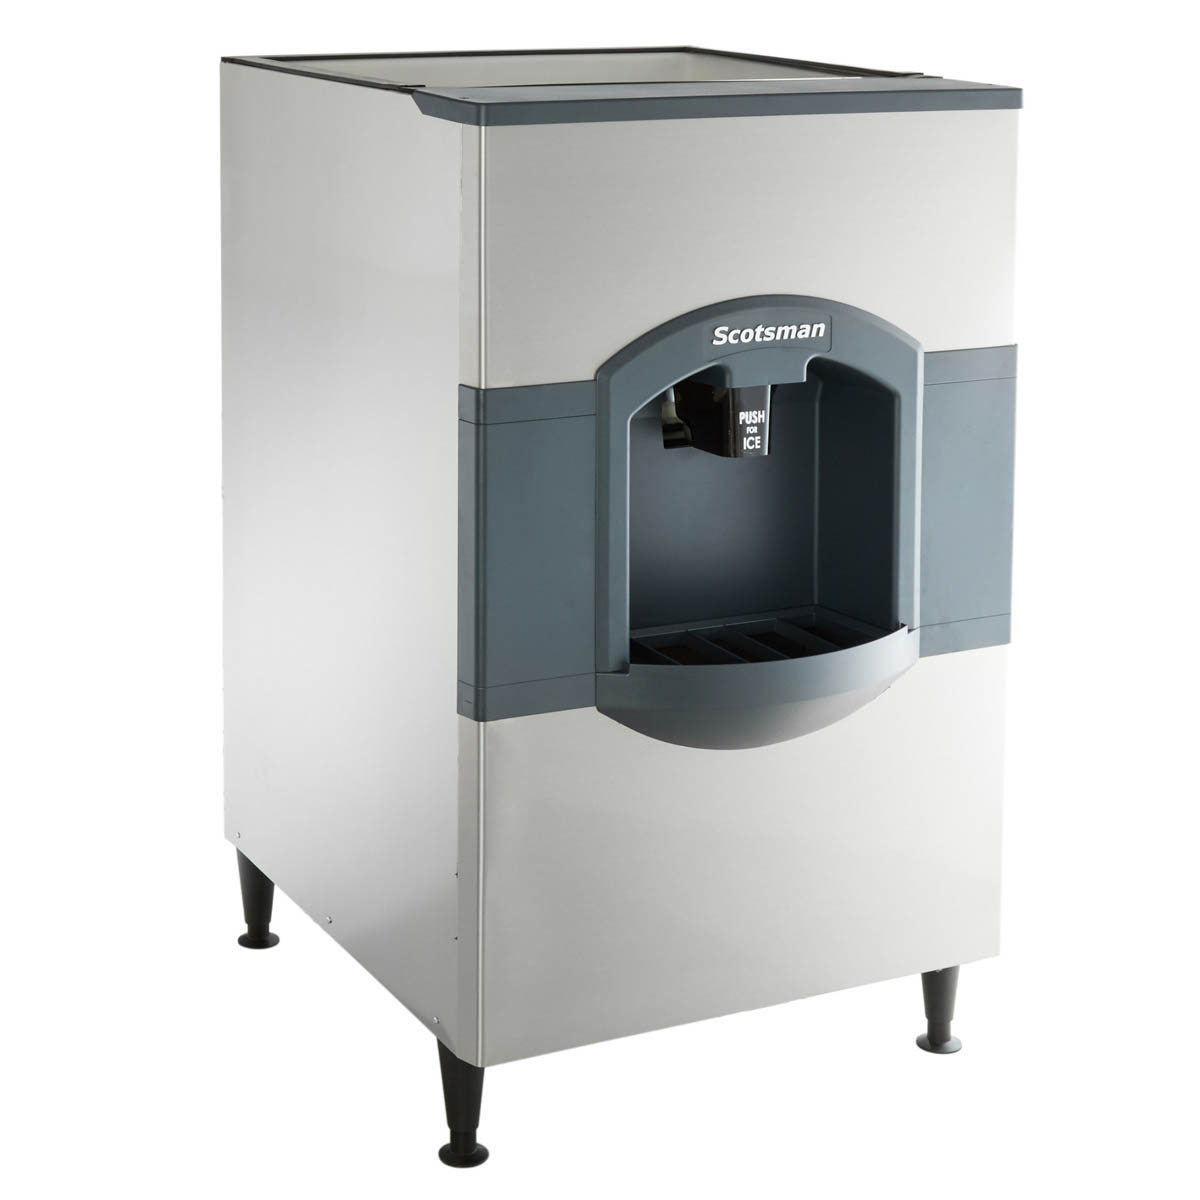 With Scotsman HD30B-1 Serving Up Ice For Your Customers, Chef's Deal